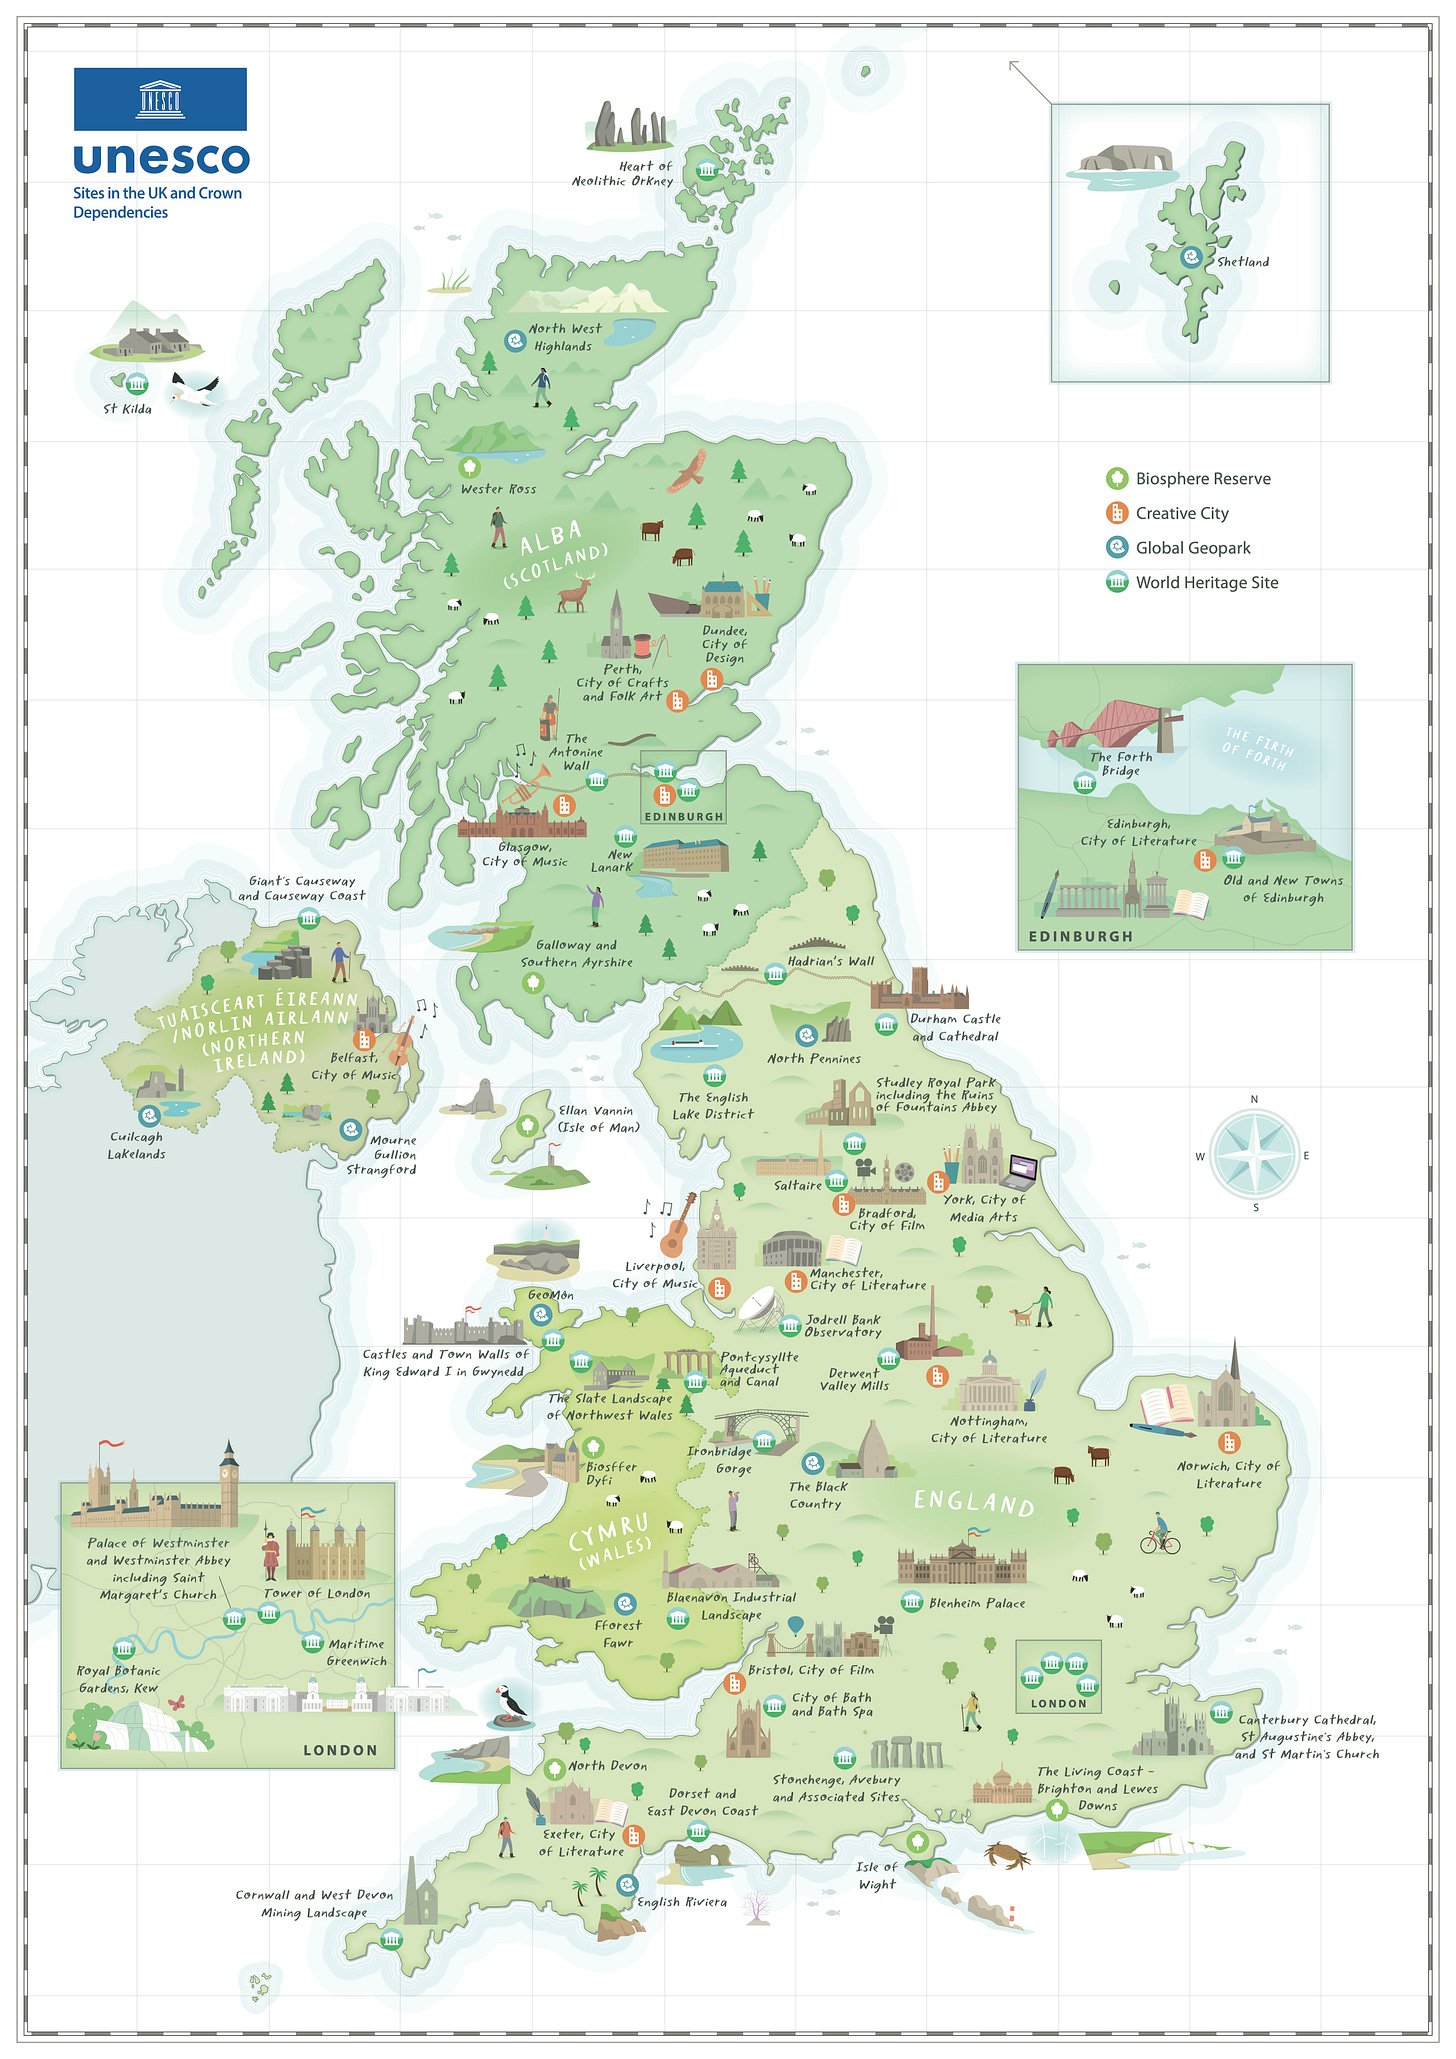 Illiustrated map of UNESCO Sites in the UK. Pretty!